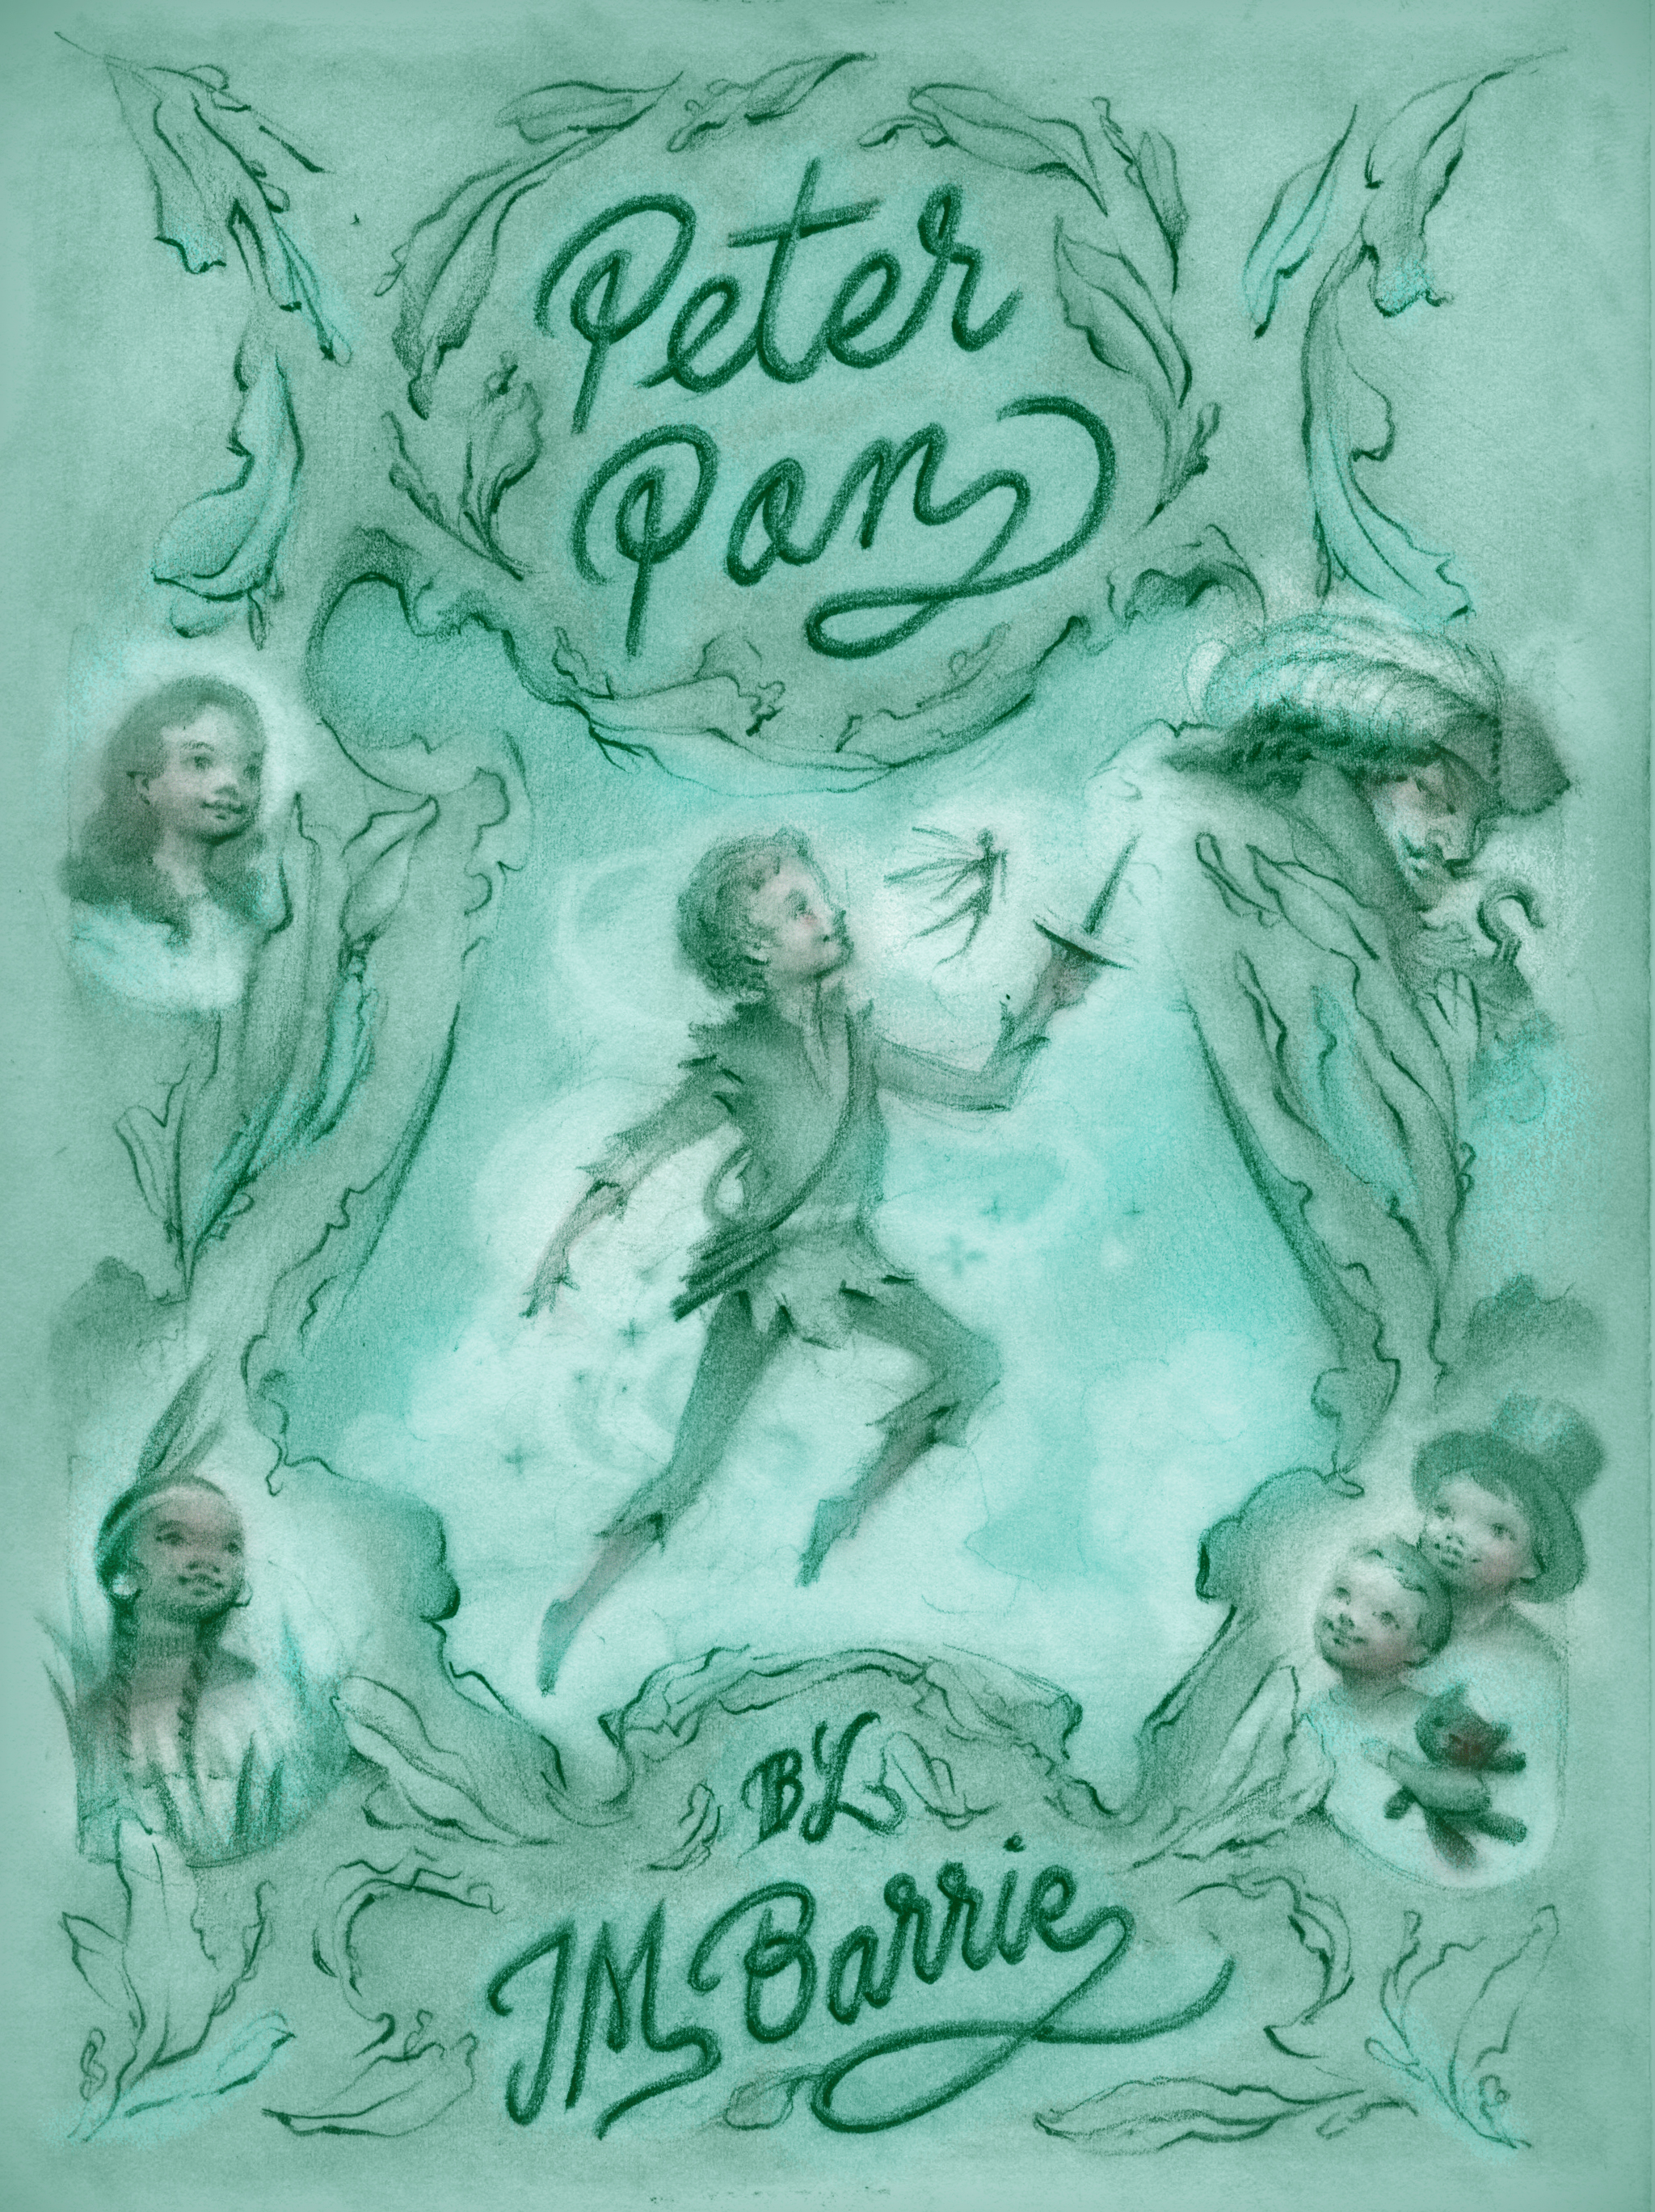 Peter Pan book cover illustration and design by Laura Dreyer.